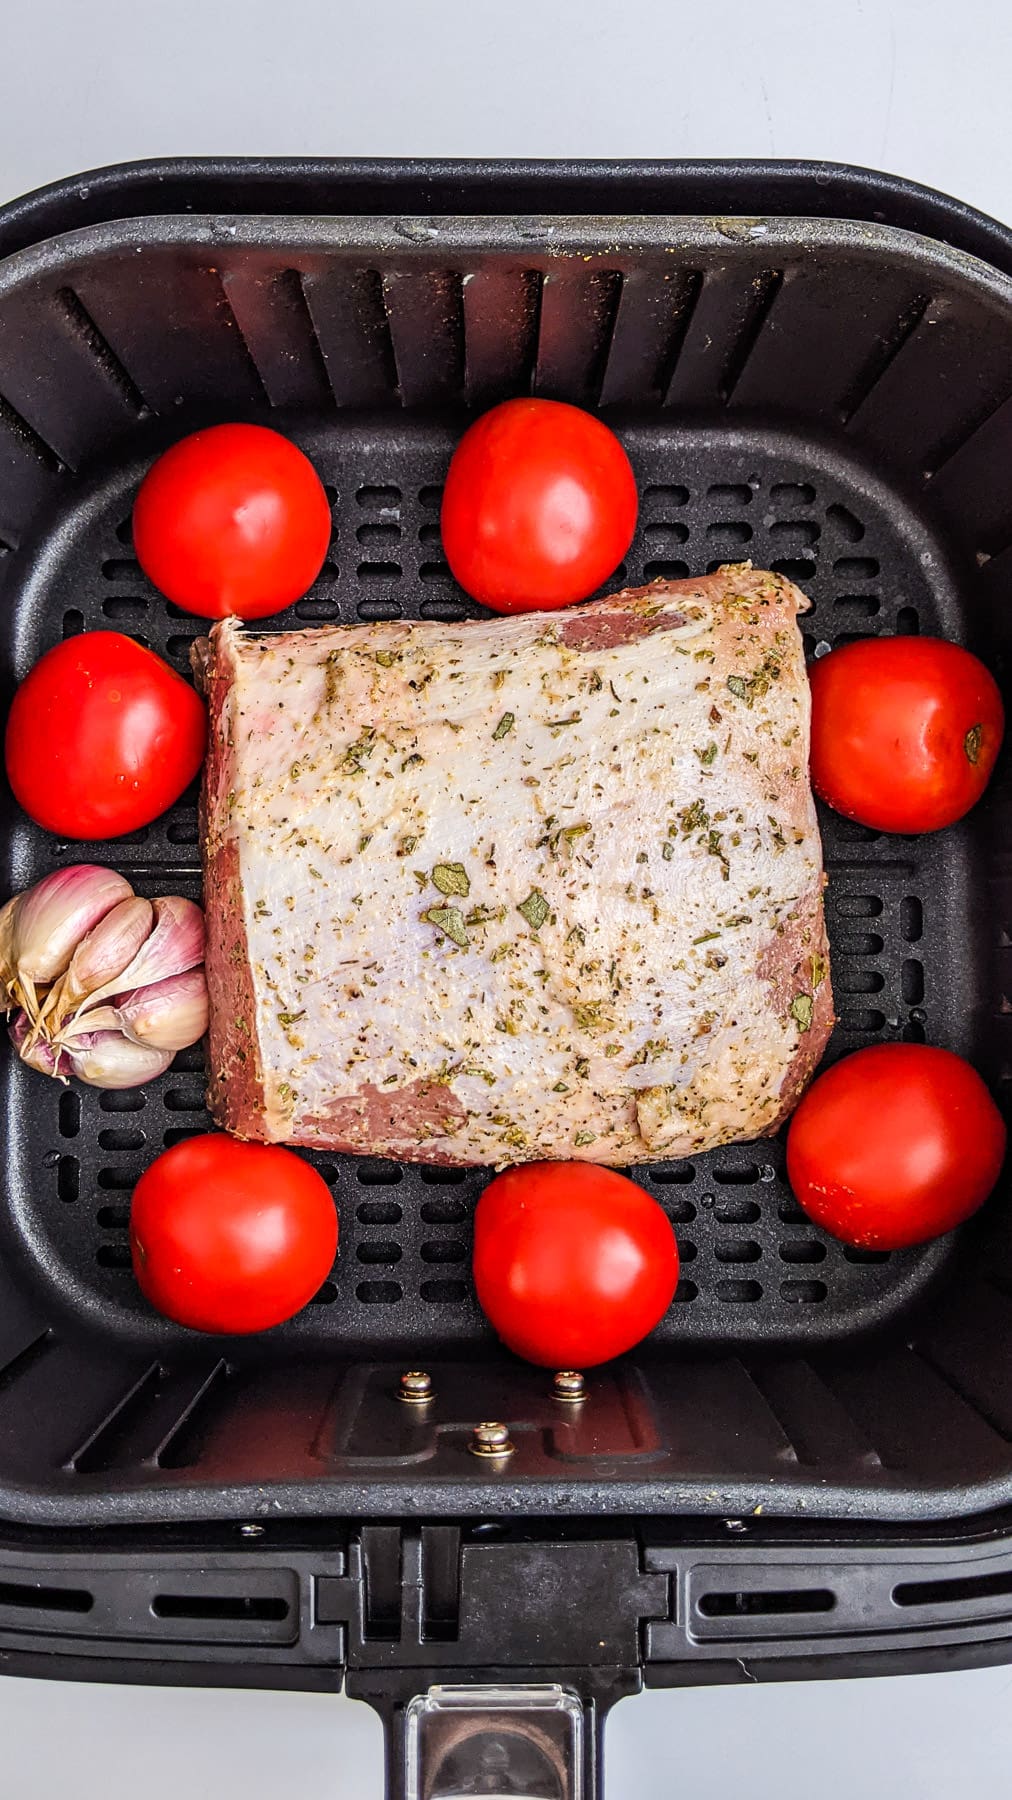 Seasoned Pork loin with tomatoes and garlic in air fryer basket.